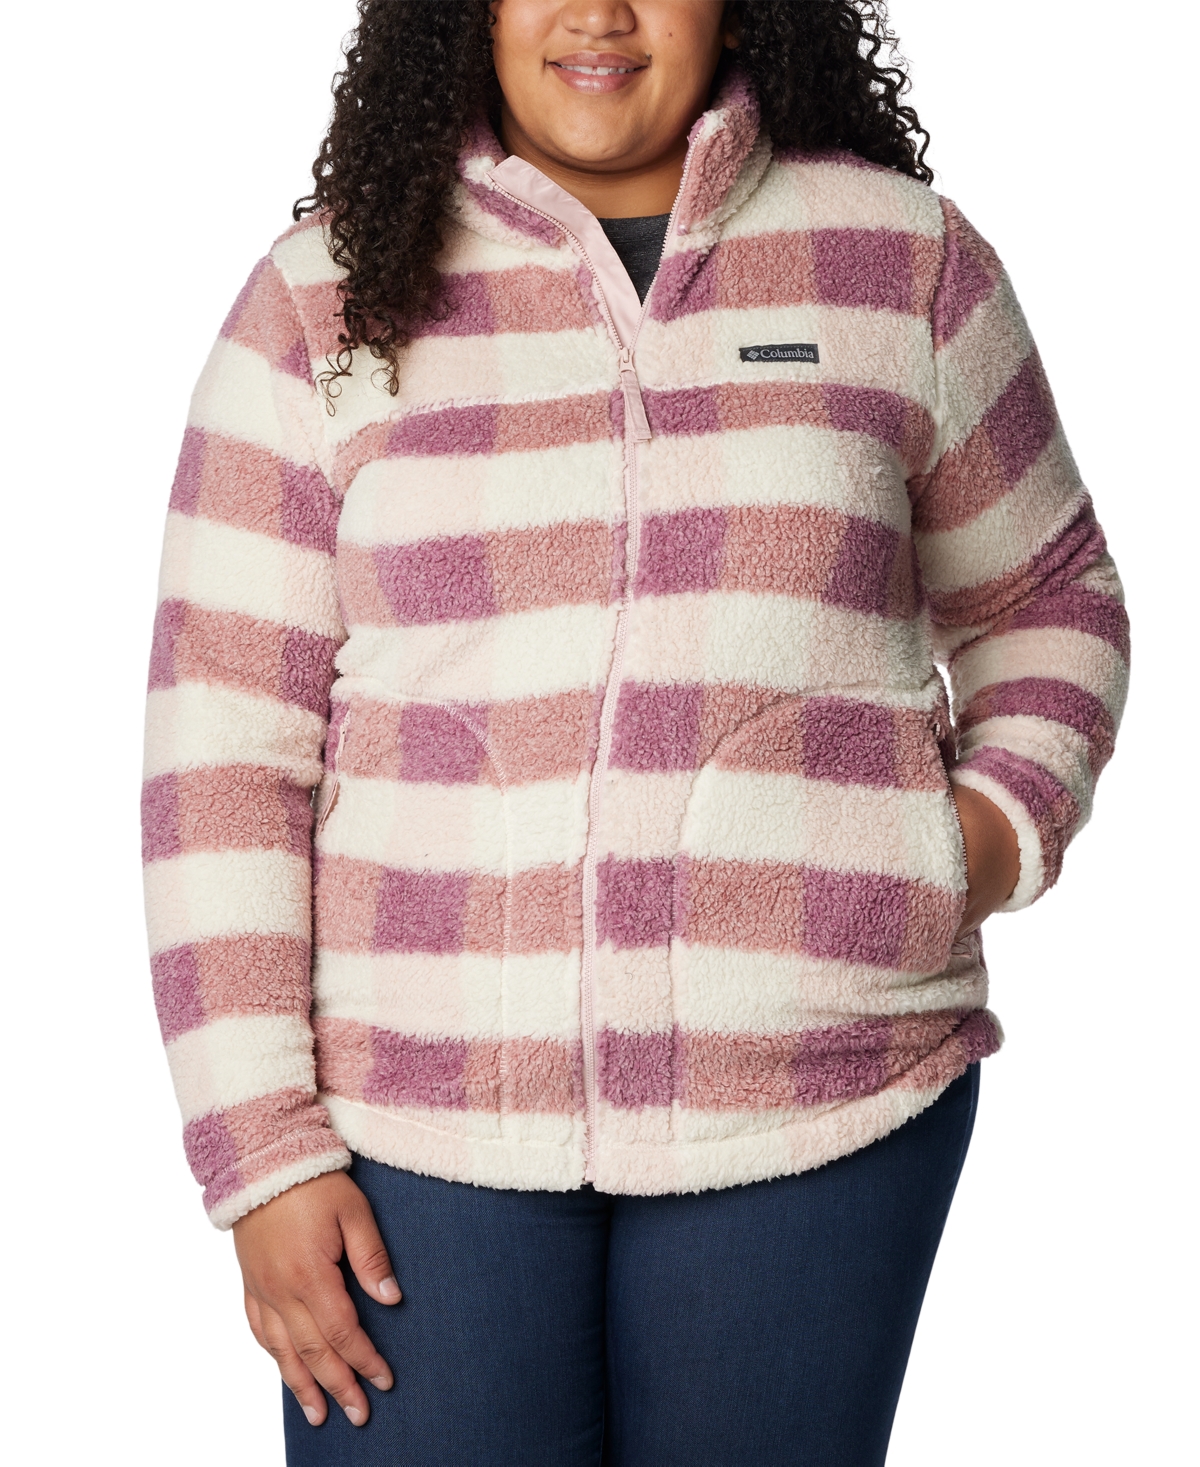 West Bend Plus Size Sherpa Jacket - Night Wave Check